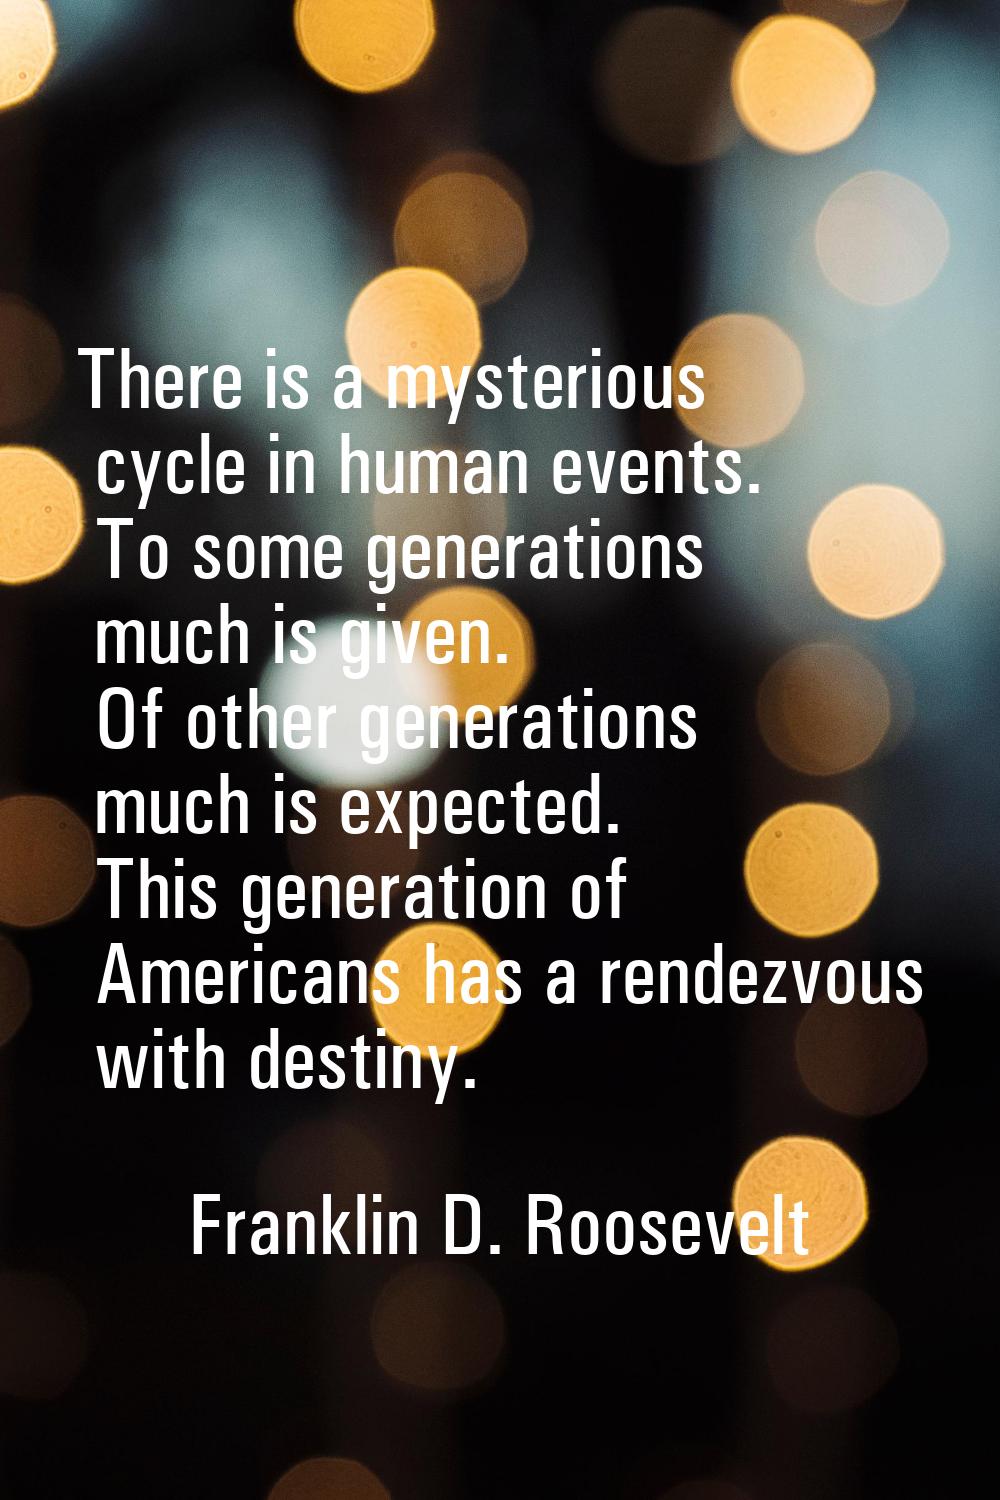 There is a mysterious cycle in human events. To some generations much is given. Of other generation